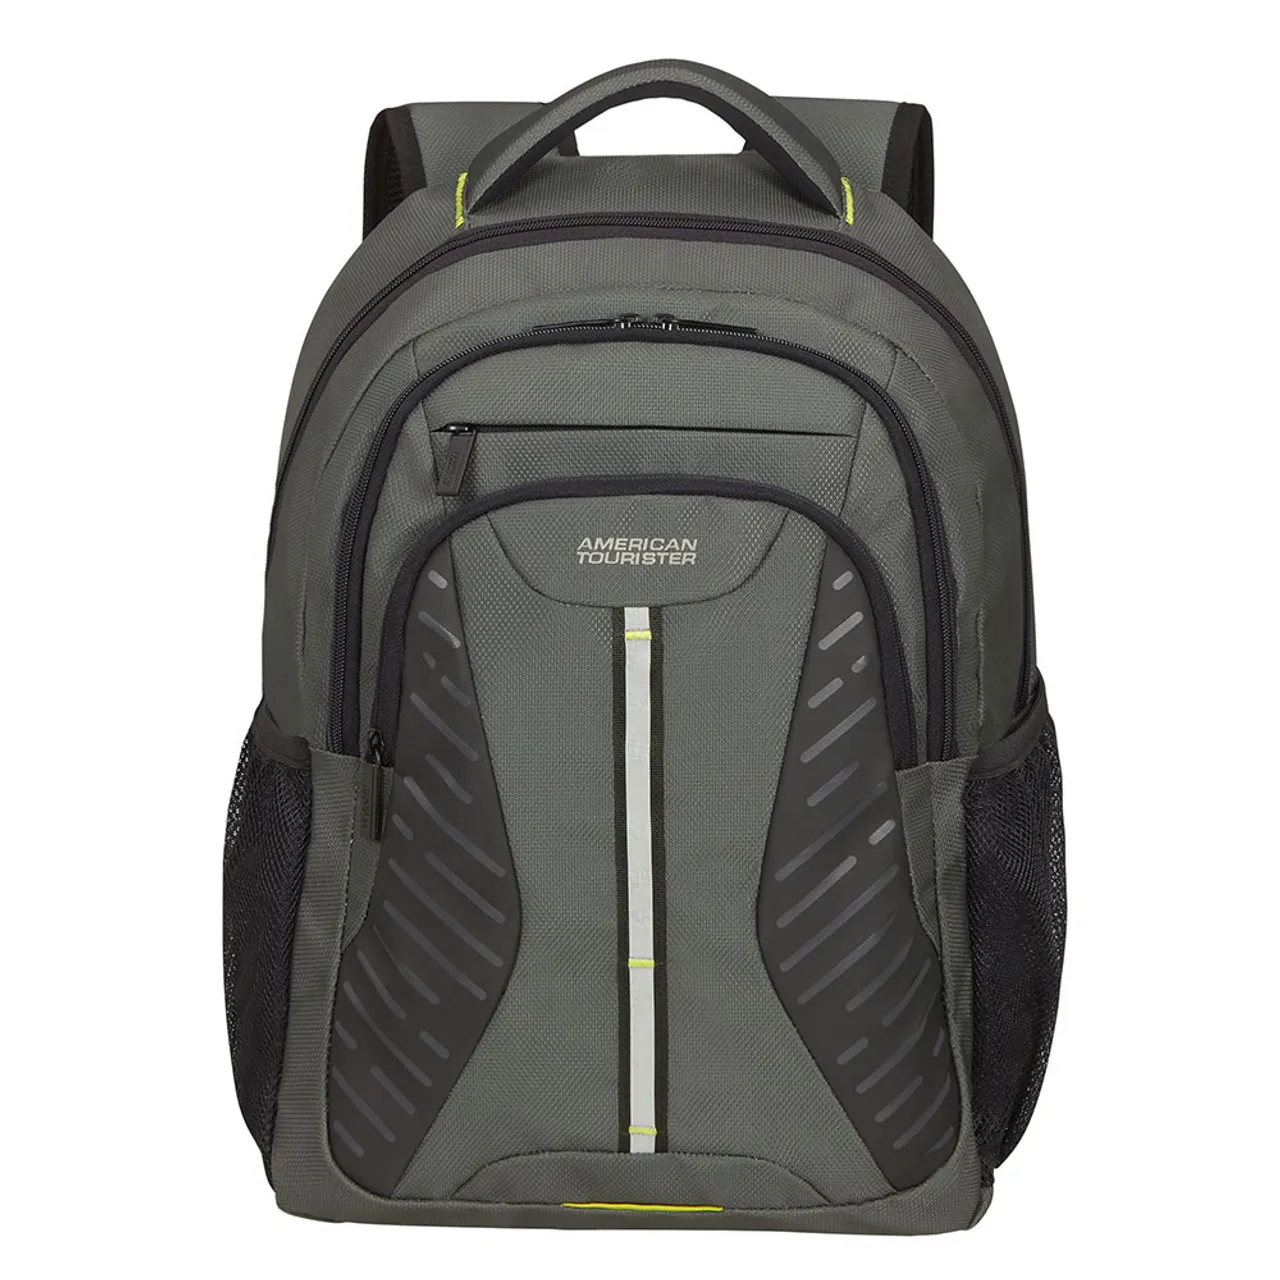 American Tourister At Work Laptop Backpack 15.6" Reflect / Shadow Grey